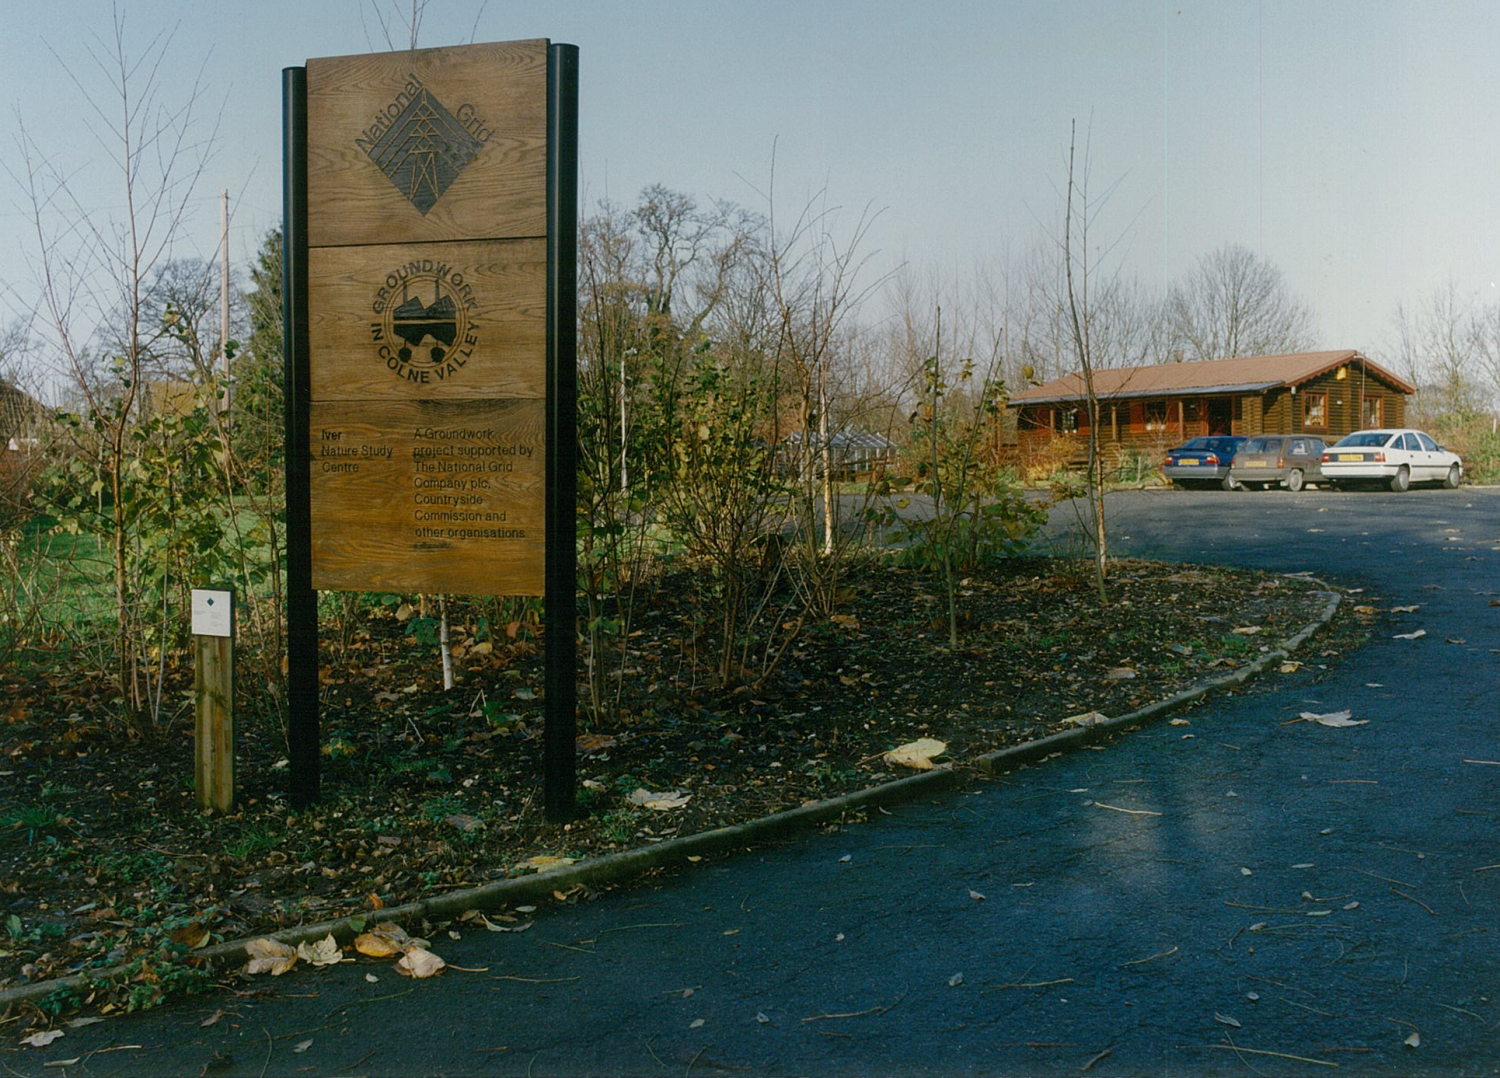 The driveway into the centre in 1990.